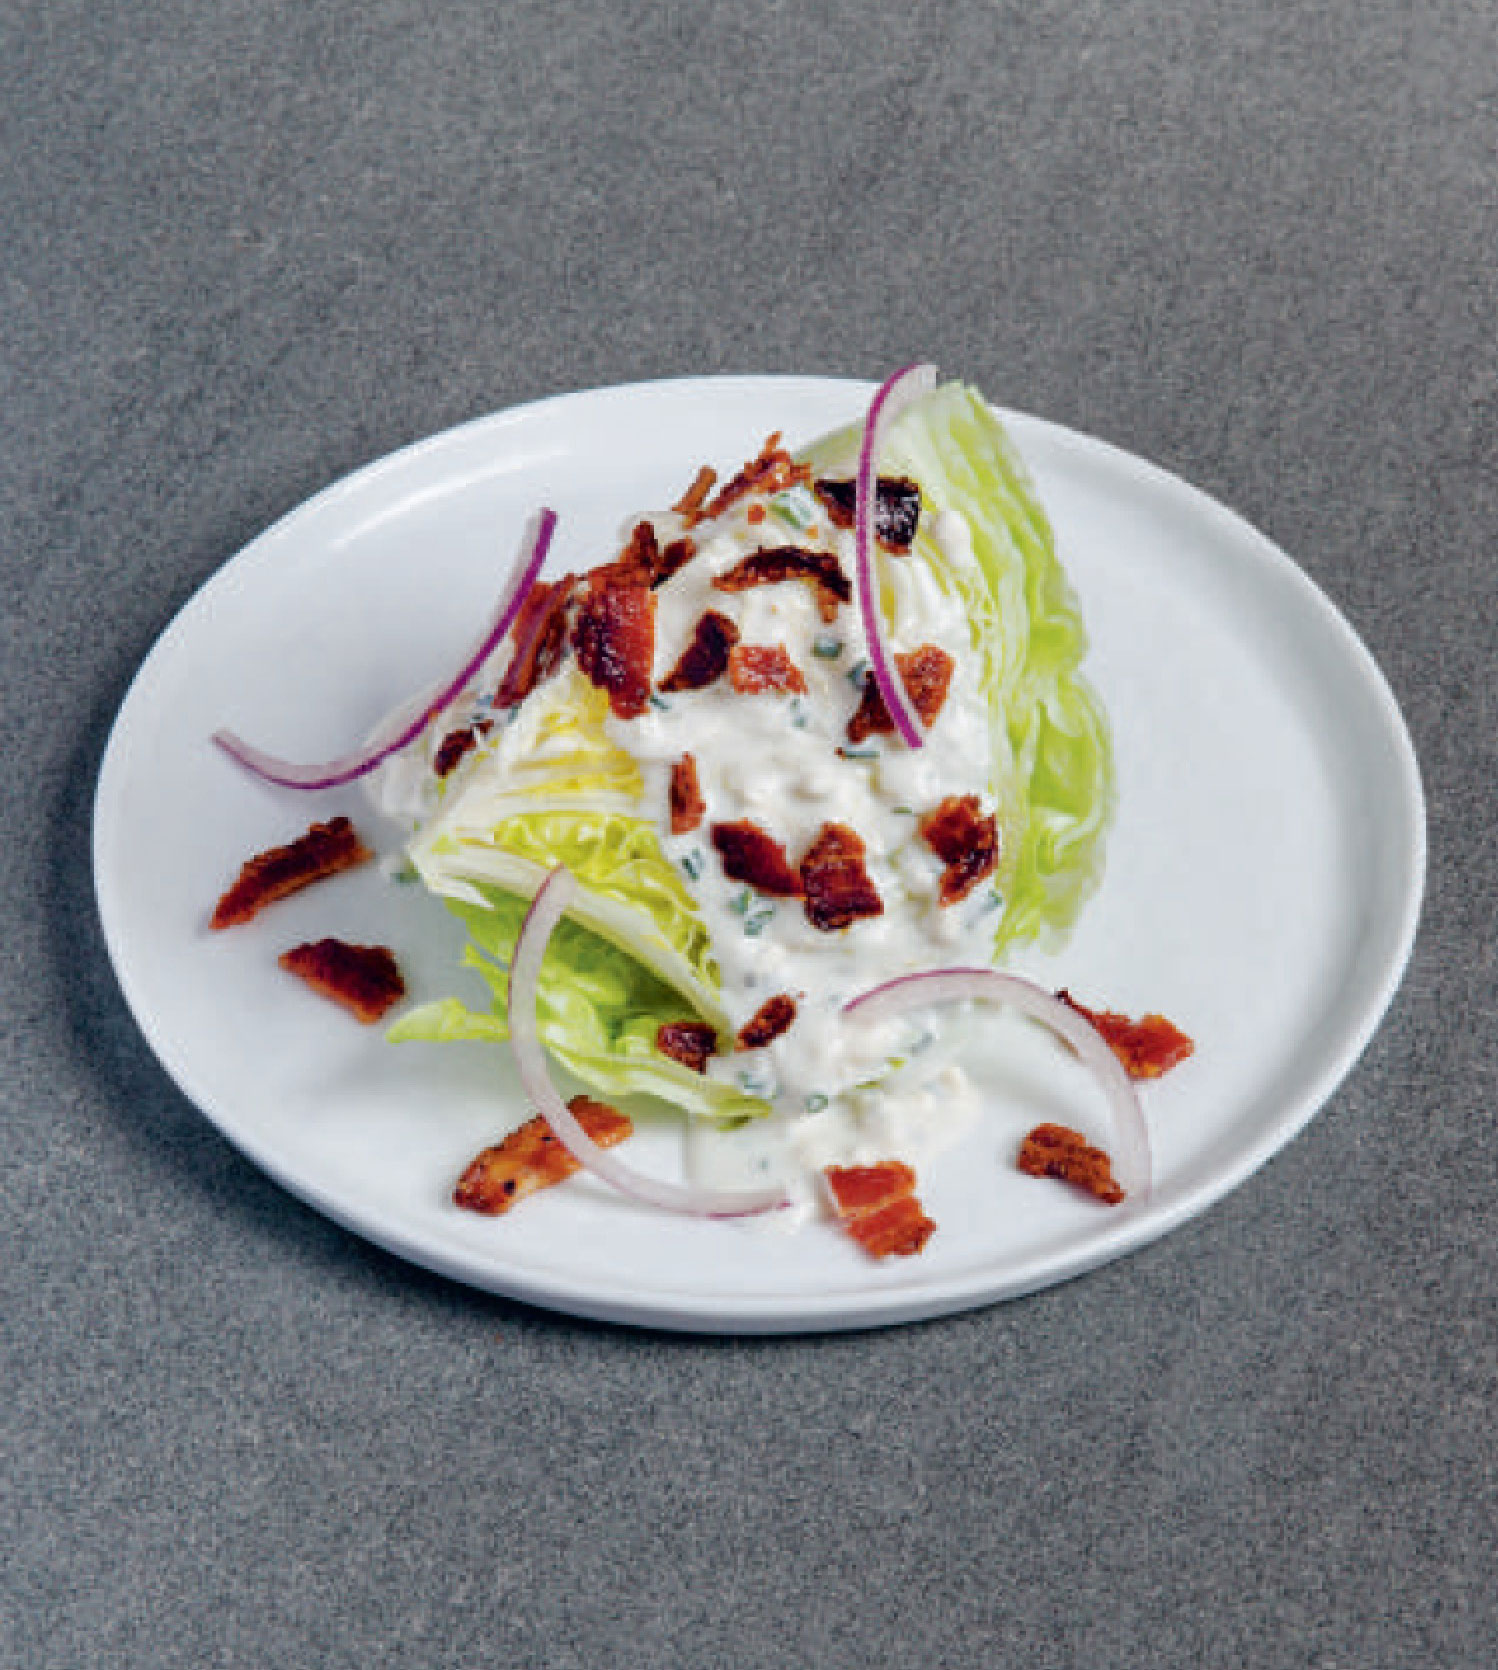 Iceberg Wedge Salad with Blue Cheese Dressing - from America the Cookbook